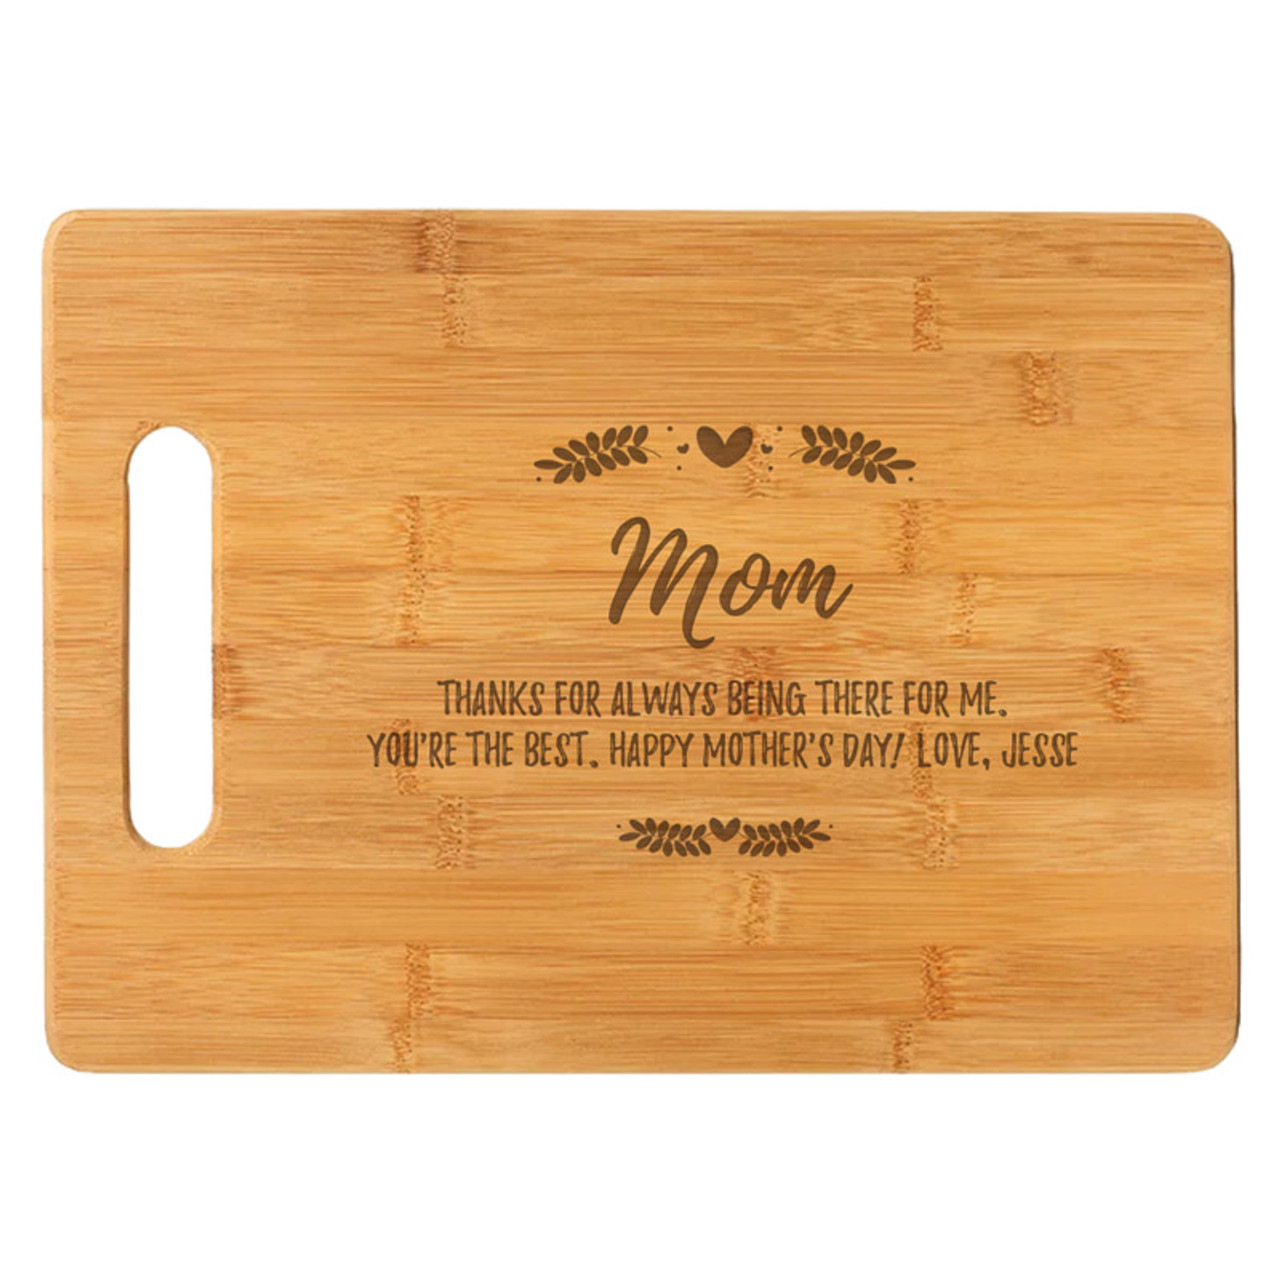 https://cdn11.bigcommerce.com/s-d22a0/images/stencil/1280x1280/products/2255/12214/personalized-cutting-board-mothers-day-gift-floral-CTB427_mom_1__57492.1656354143.jpg?c=2